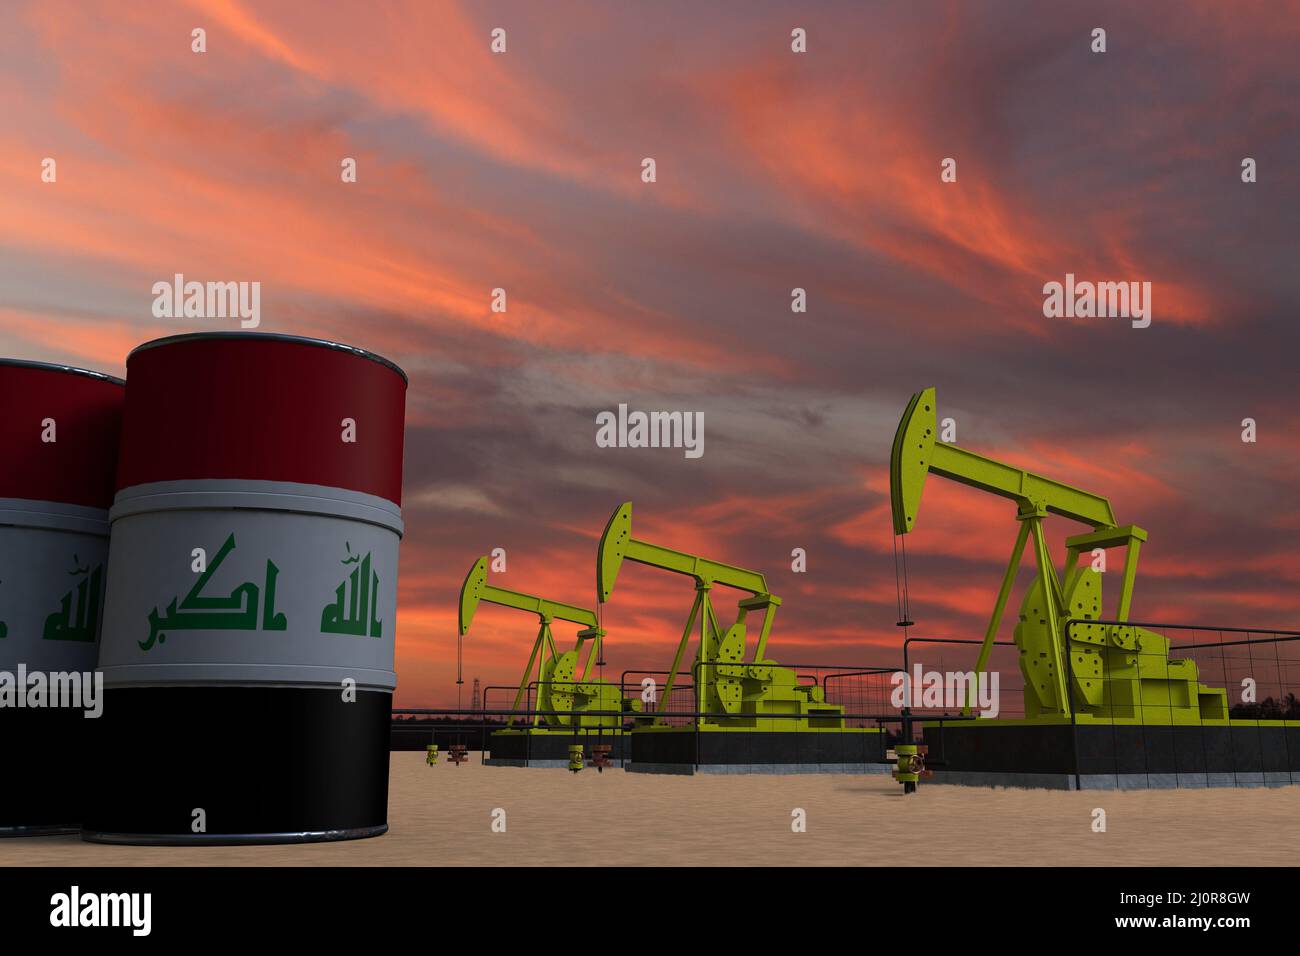 Nice pumpjack oil extraction and cloudy sky in sunset with the IRAQ flag on oil barrels 3D rendering Stock Photo